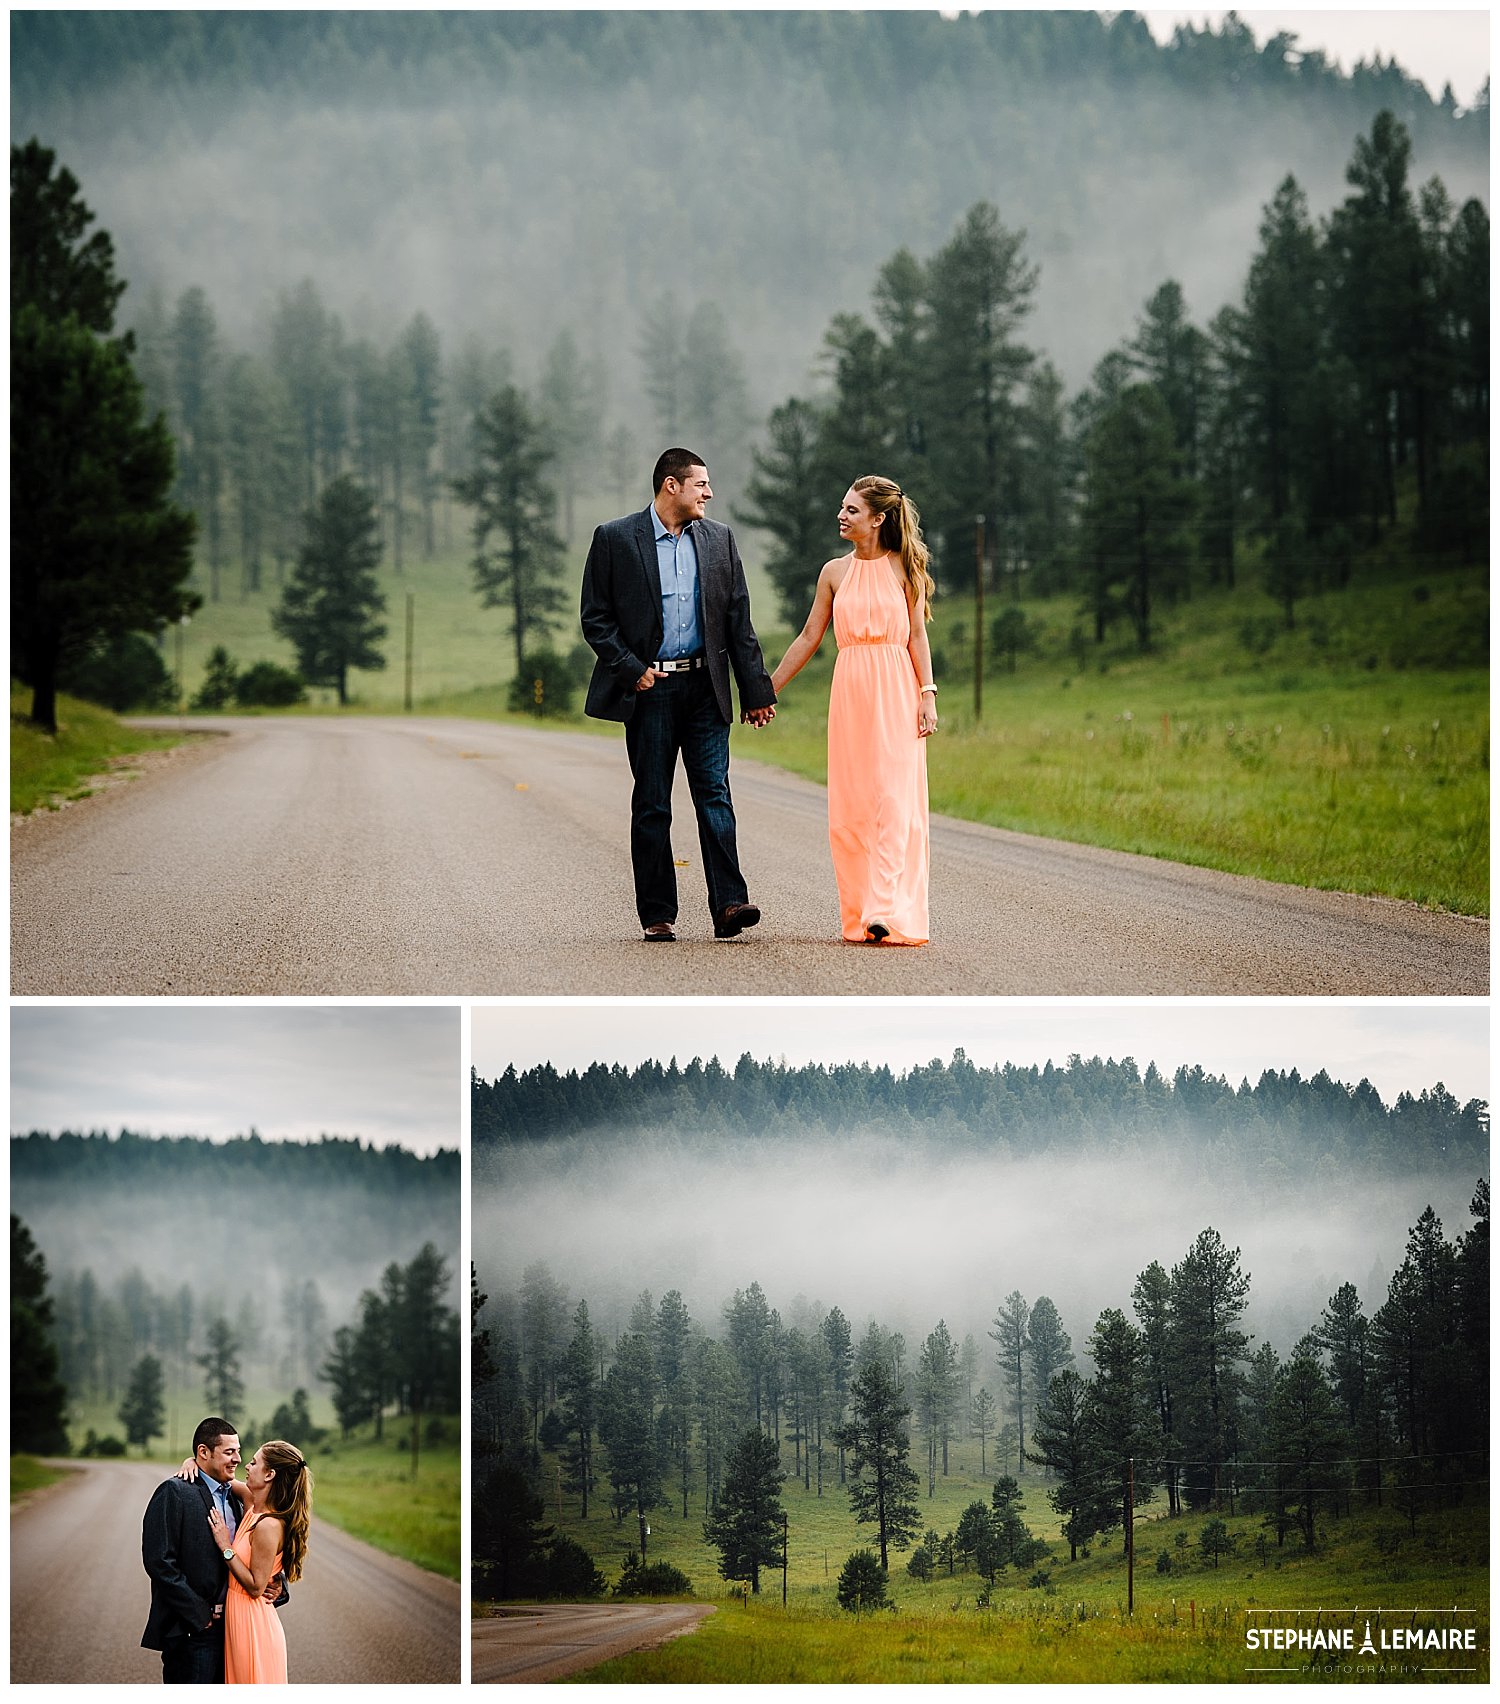 Rustic engagement picture in the mountains with fog. couple is holding hands on a road.